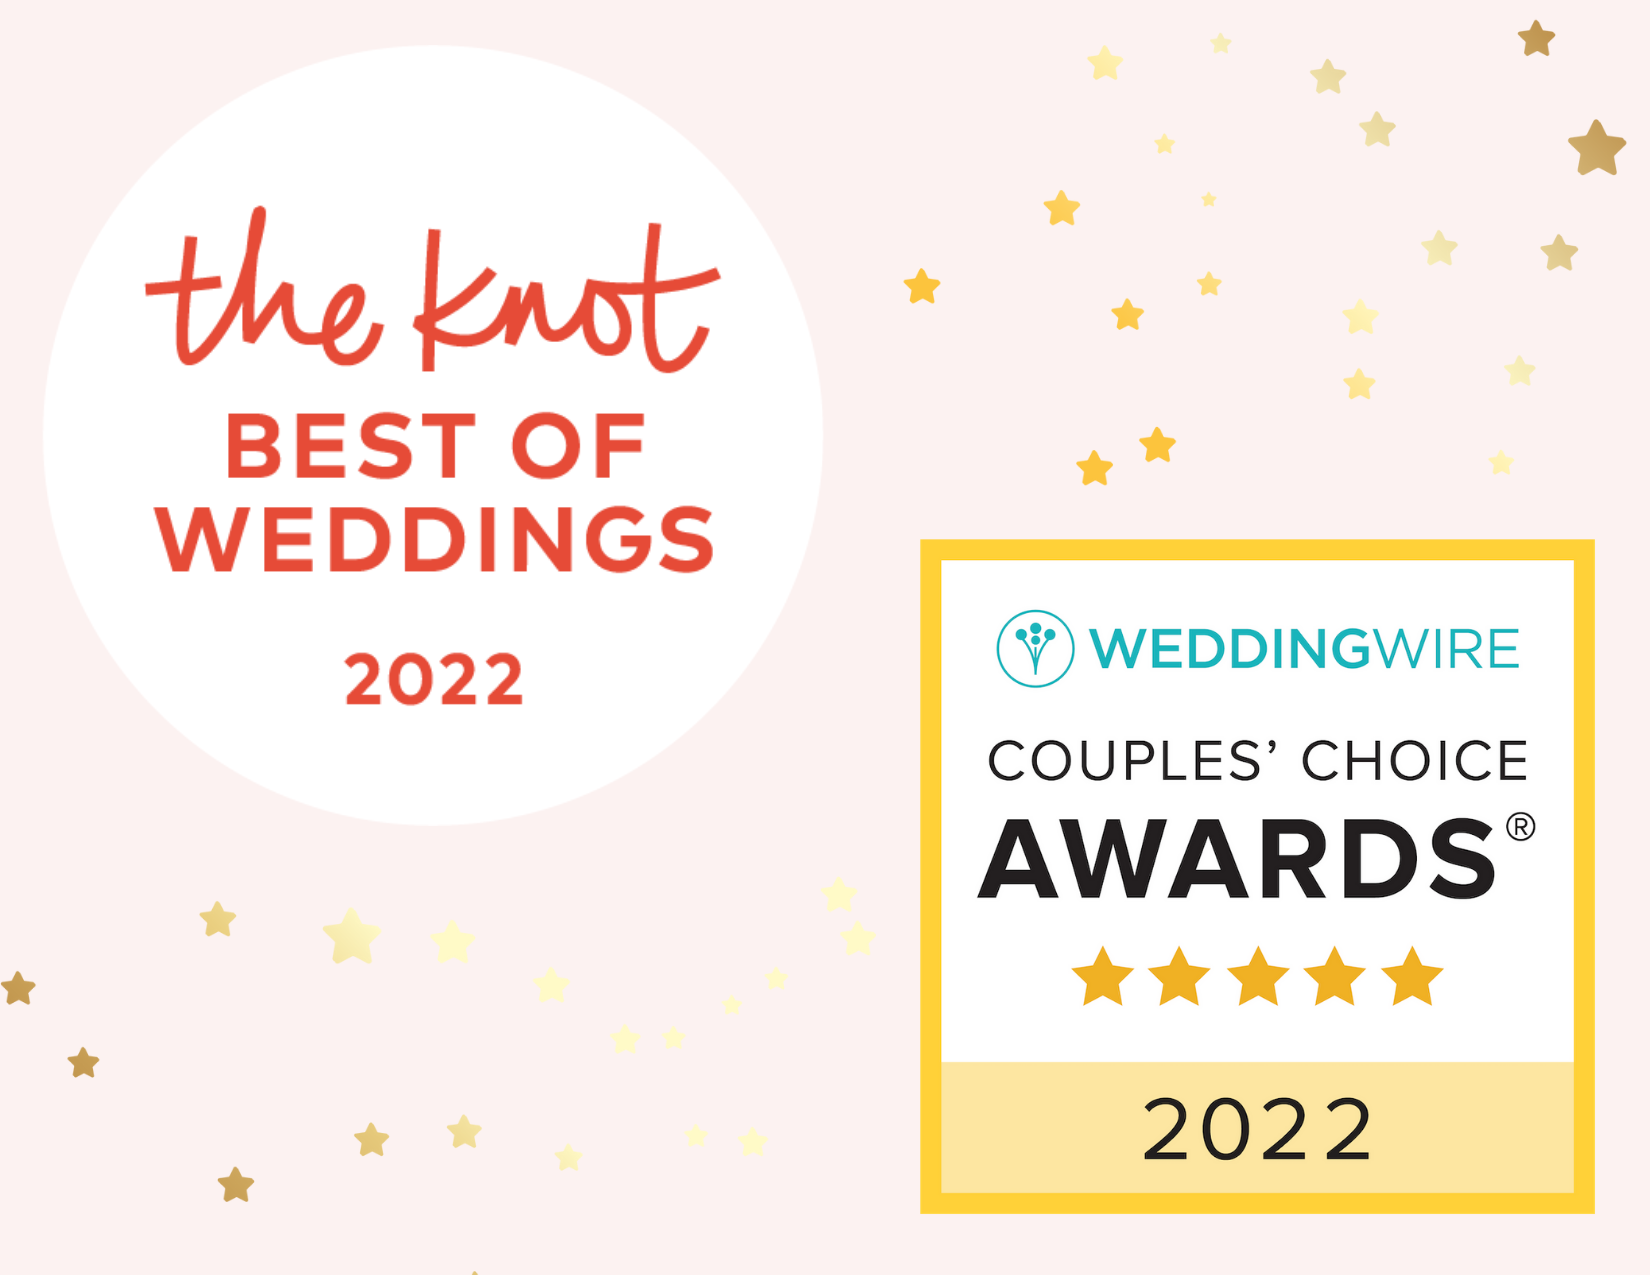 2022 THE KNOT BEST OF WEDDINGS & WEDDING WIRE COUPLES' CHOICE AWARDS